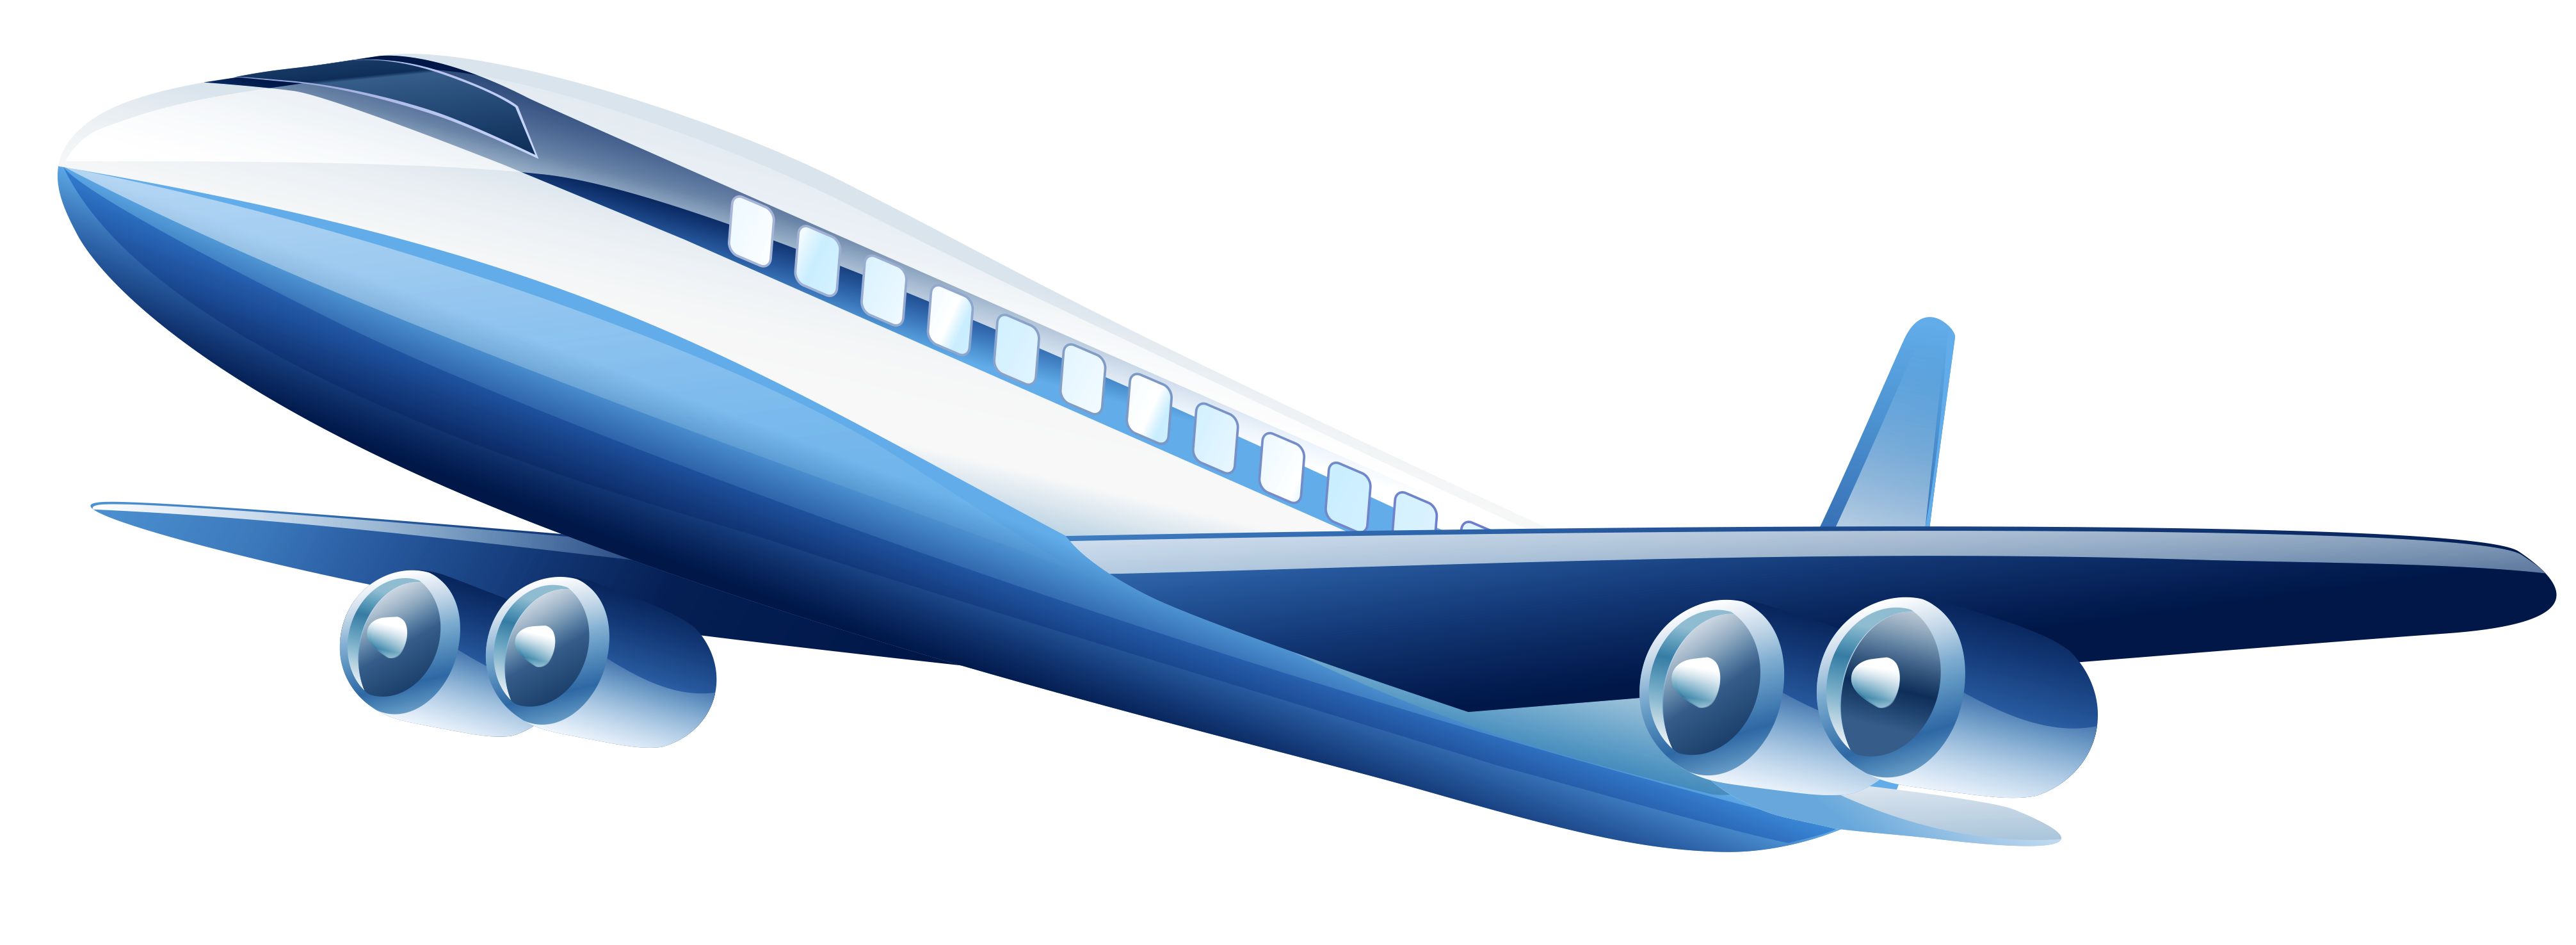 Airplane_Clipart.png?m=1433777009 